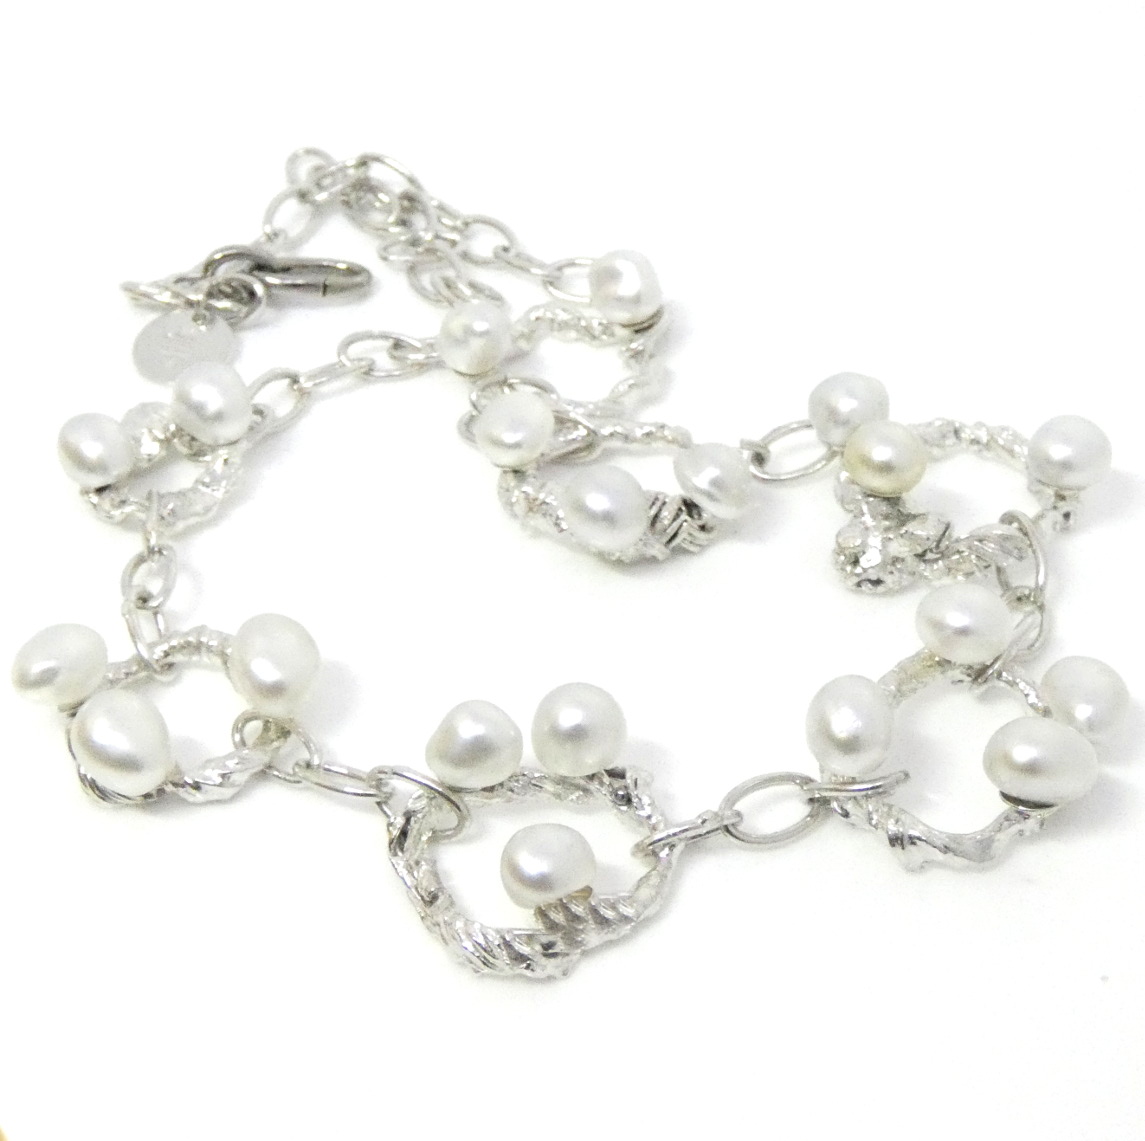 Handmade Chain and White South Sea Keishi Pearls Necklace